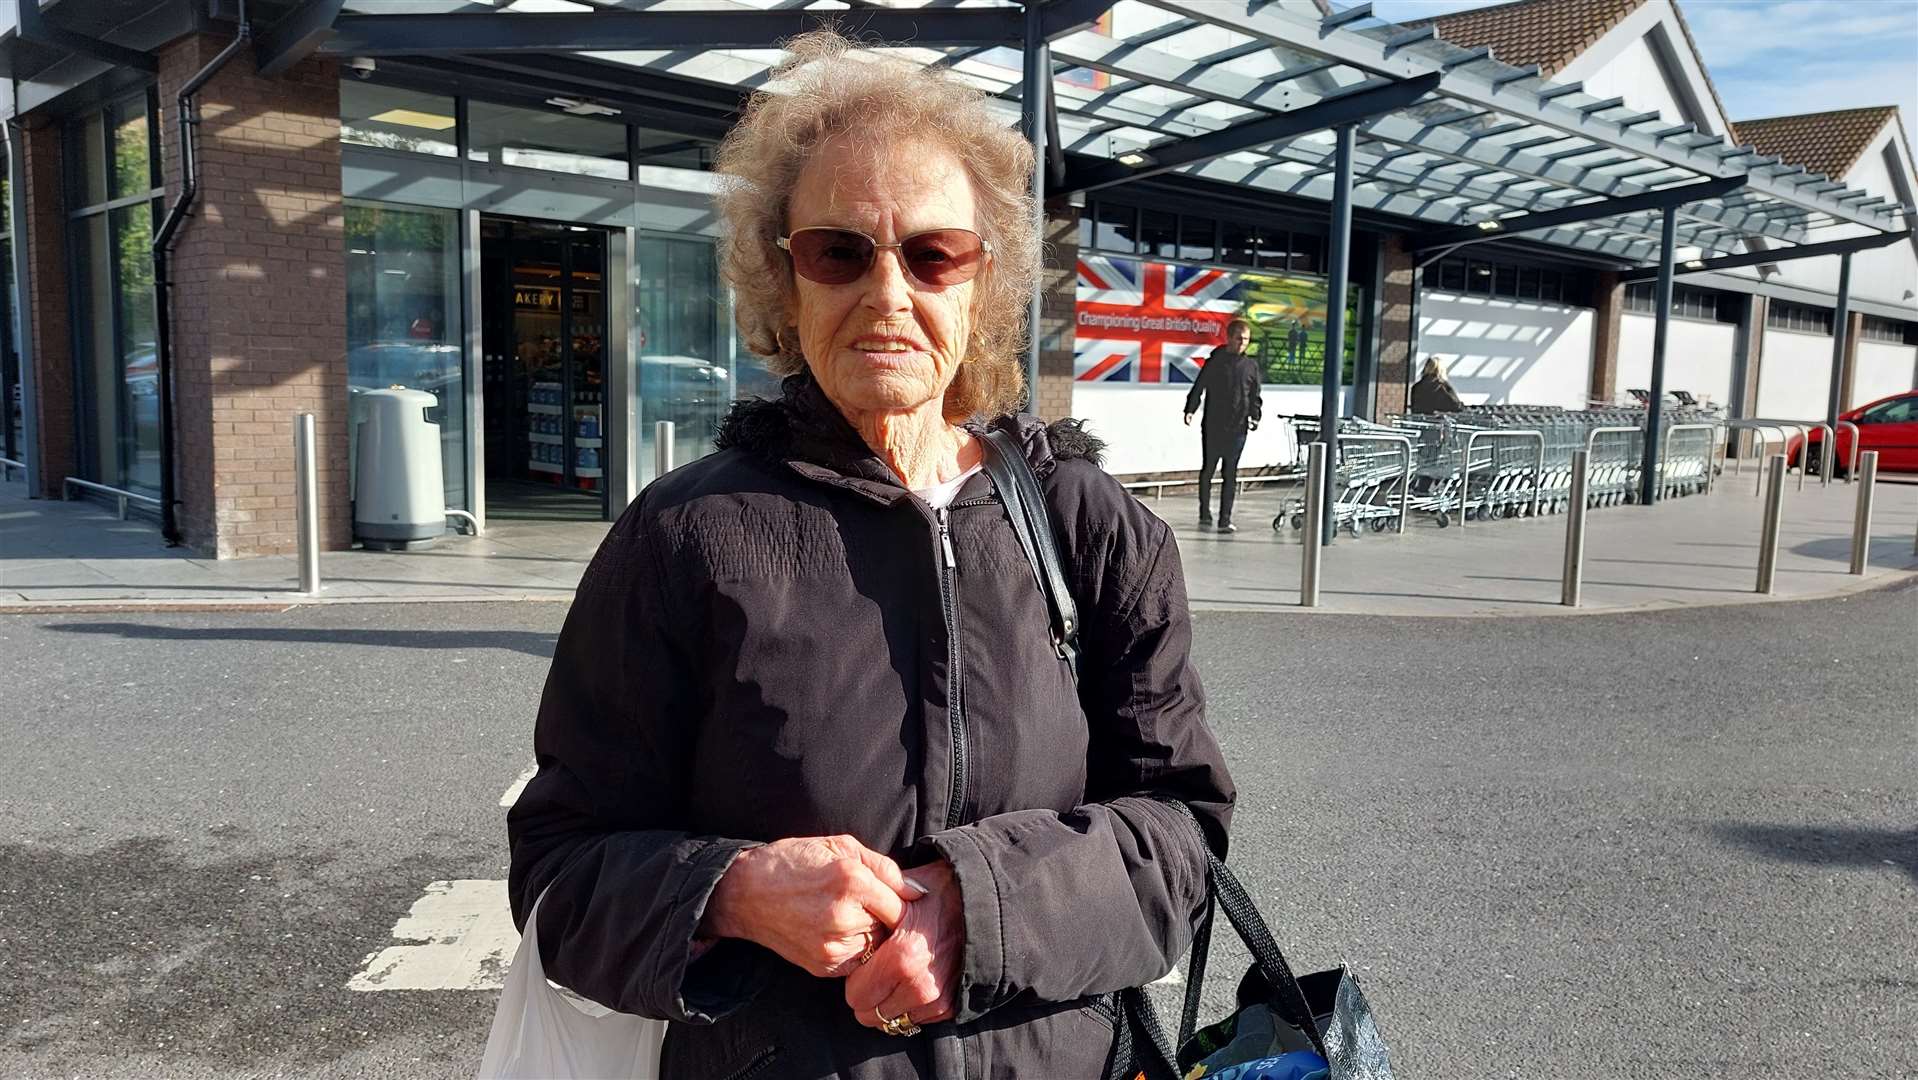 Shirley Dry, 74, lives in Dover and prefers using manned checkouts